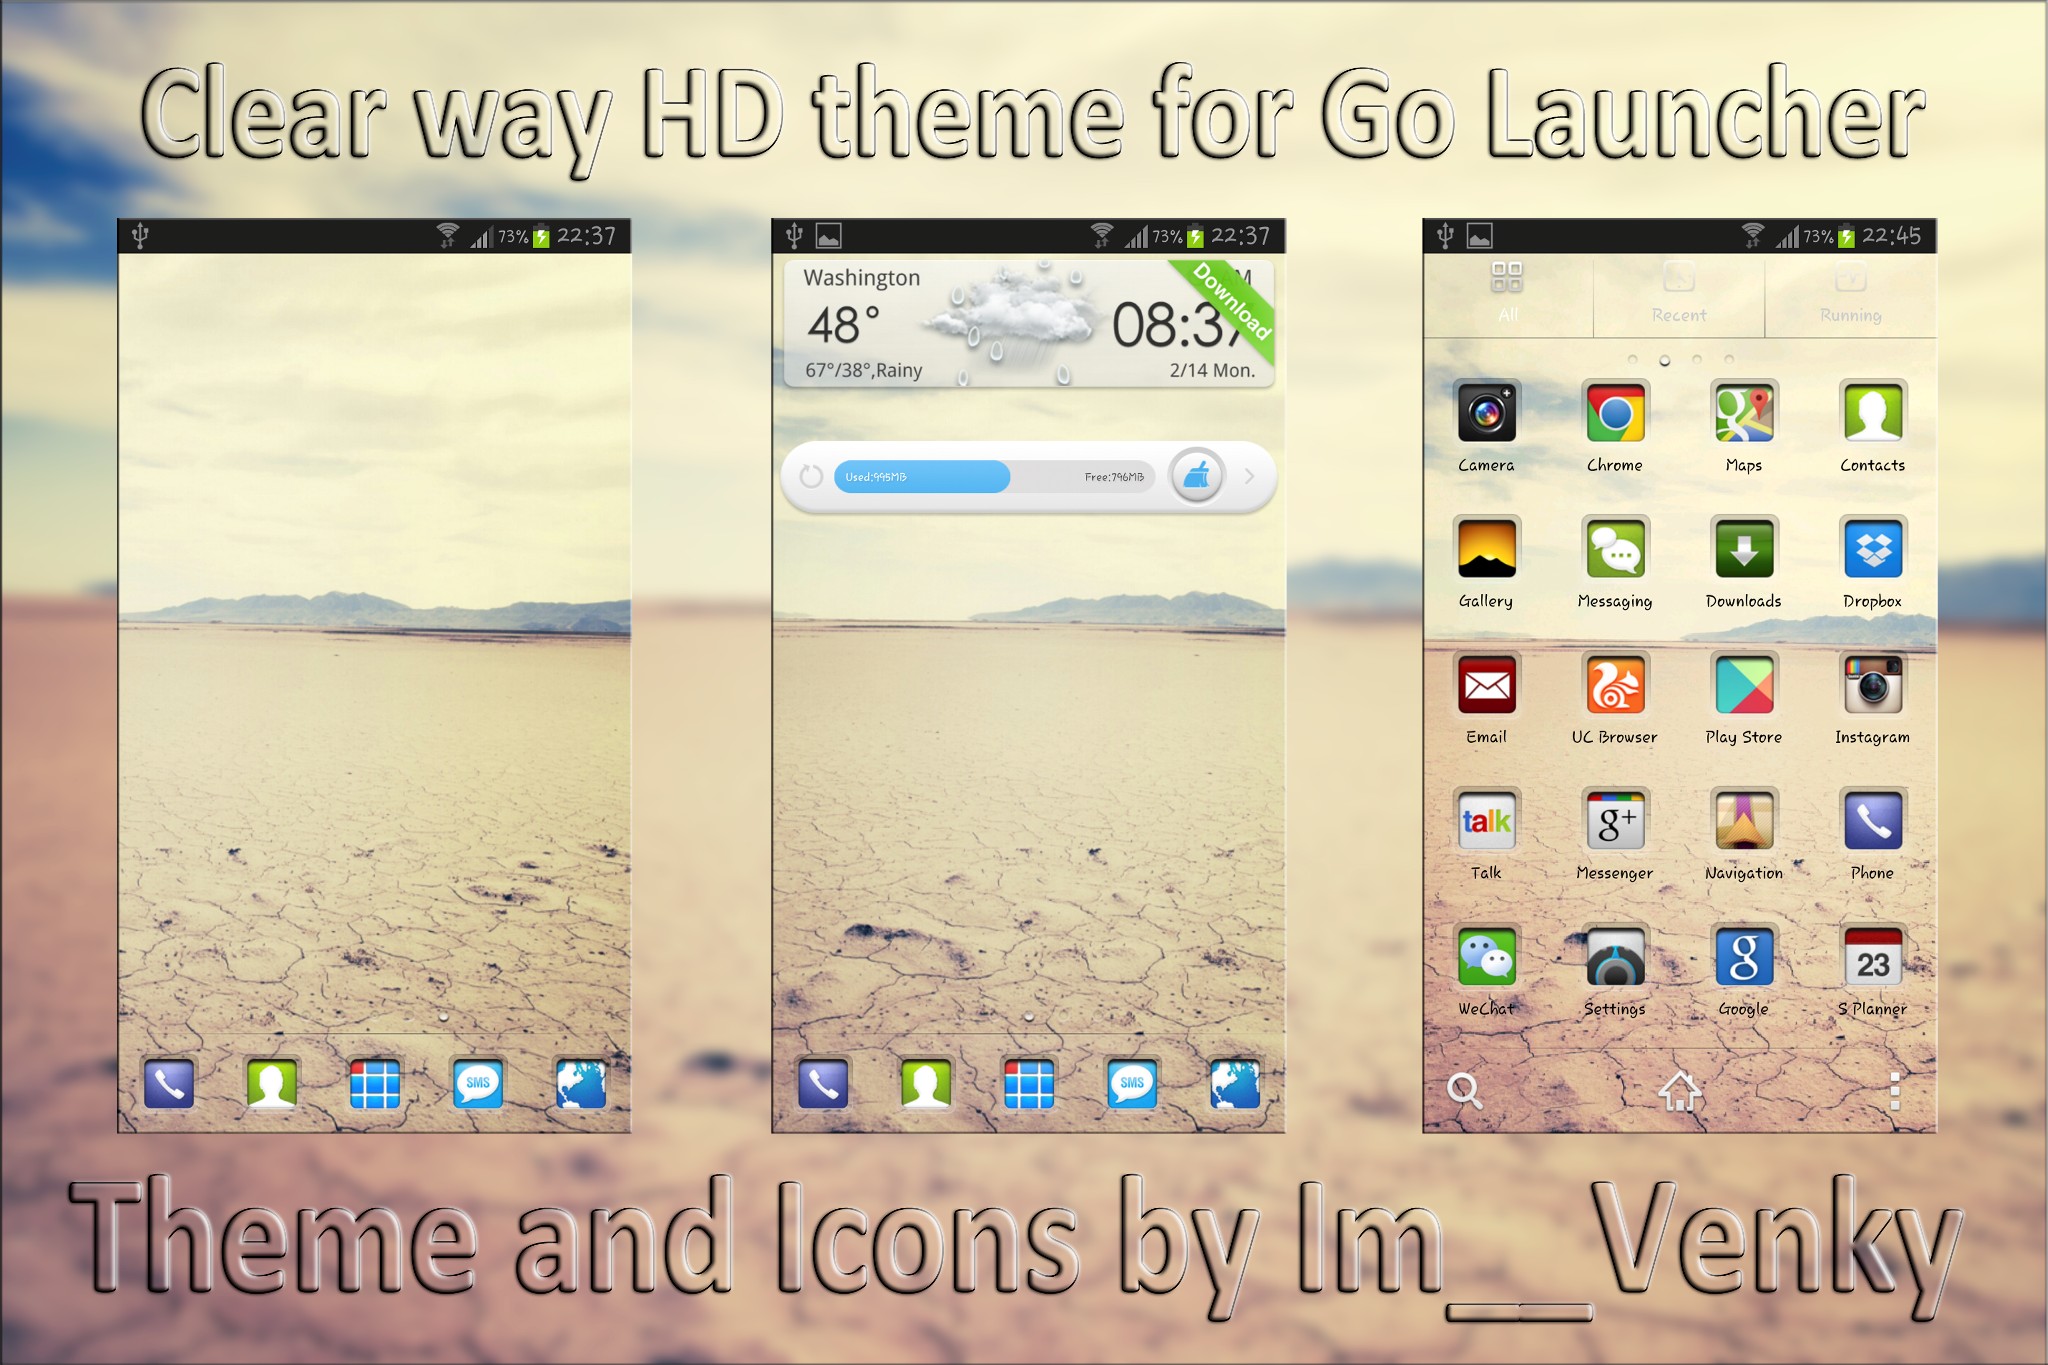 Clear way HD theme by Im Venky